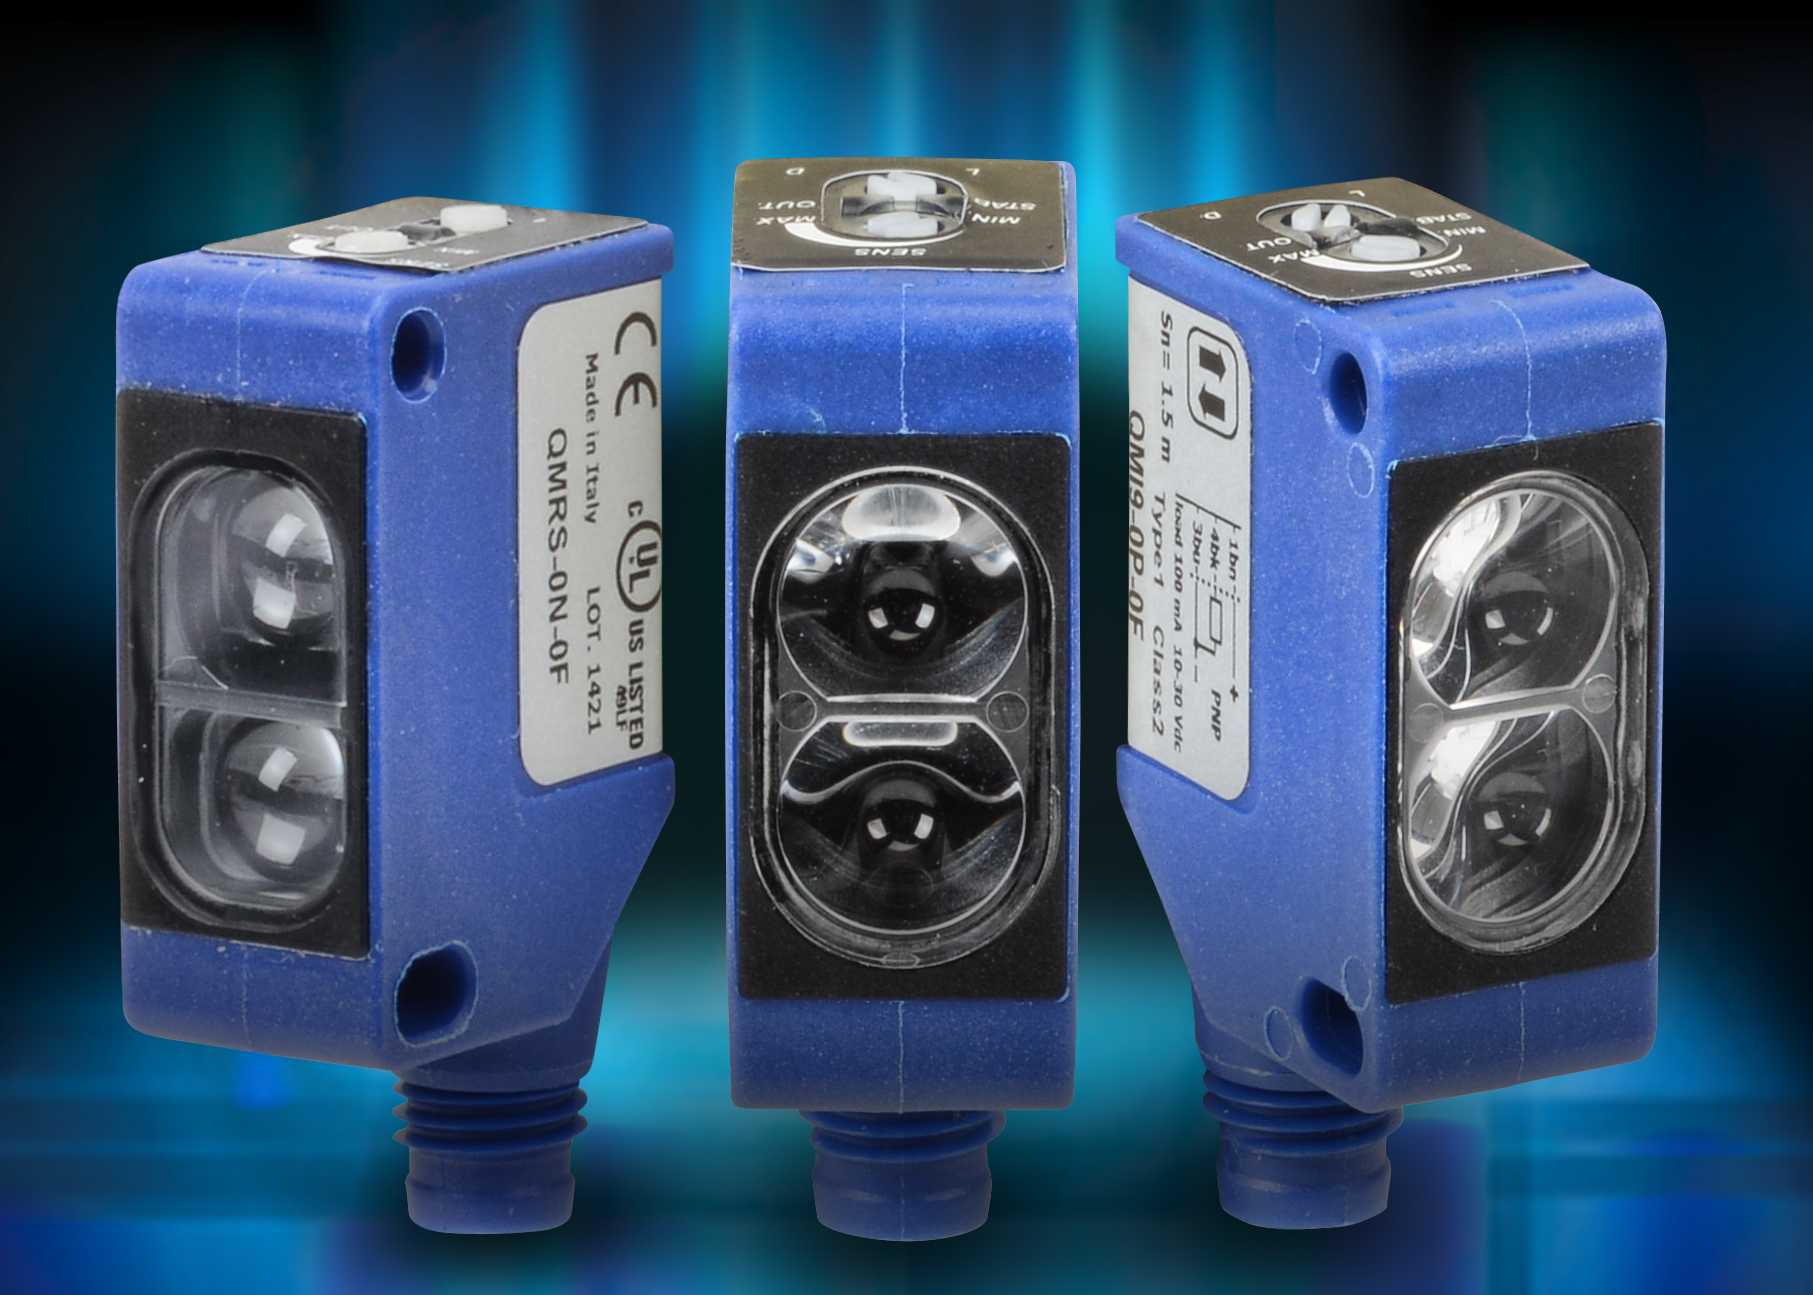 AutomationDirect Adds More Photoelectric Sensors